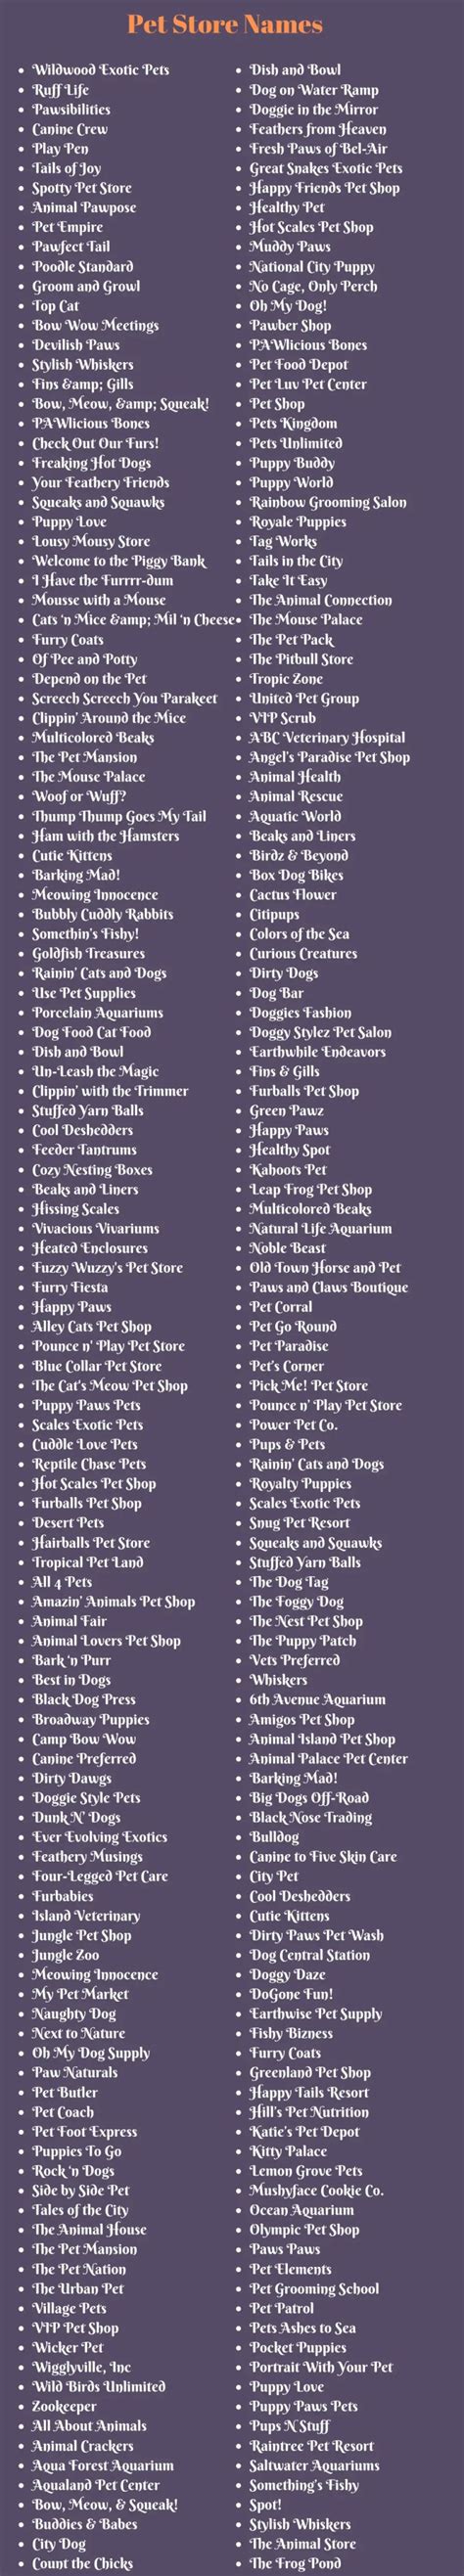 Pet Store Names 400 Names For Pet Stores And Shop